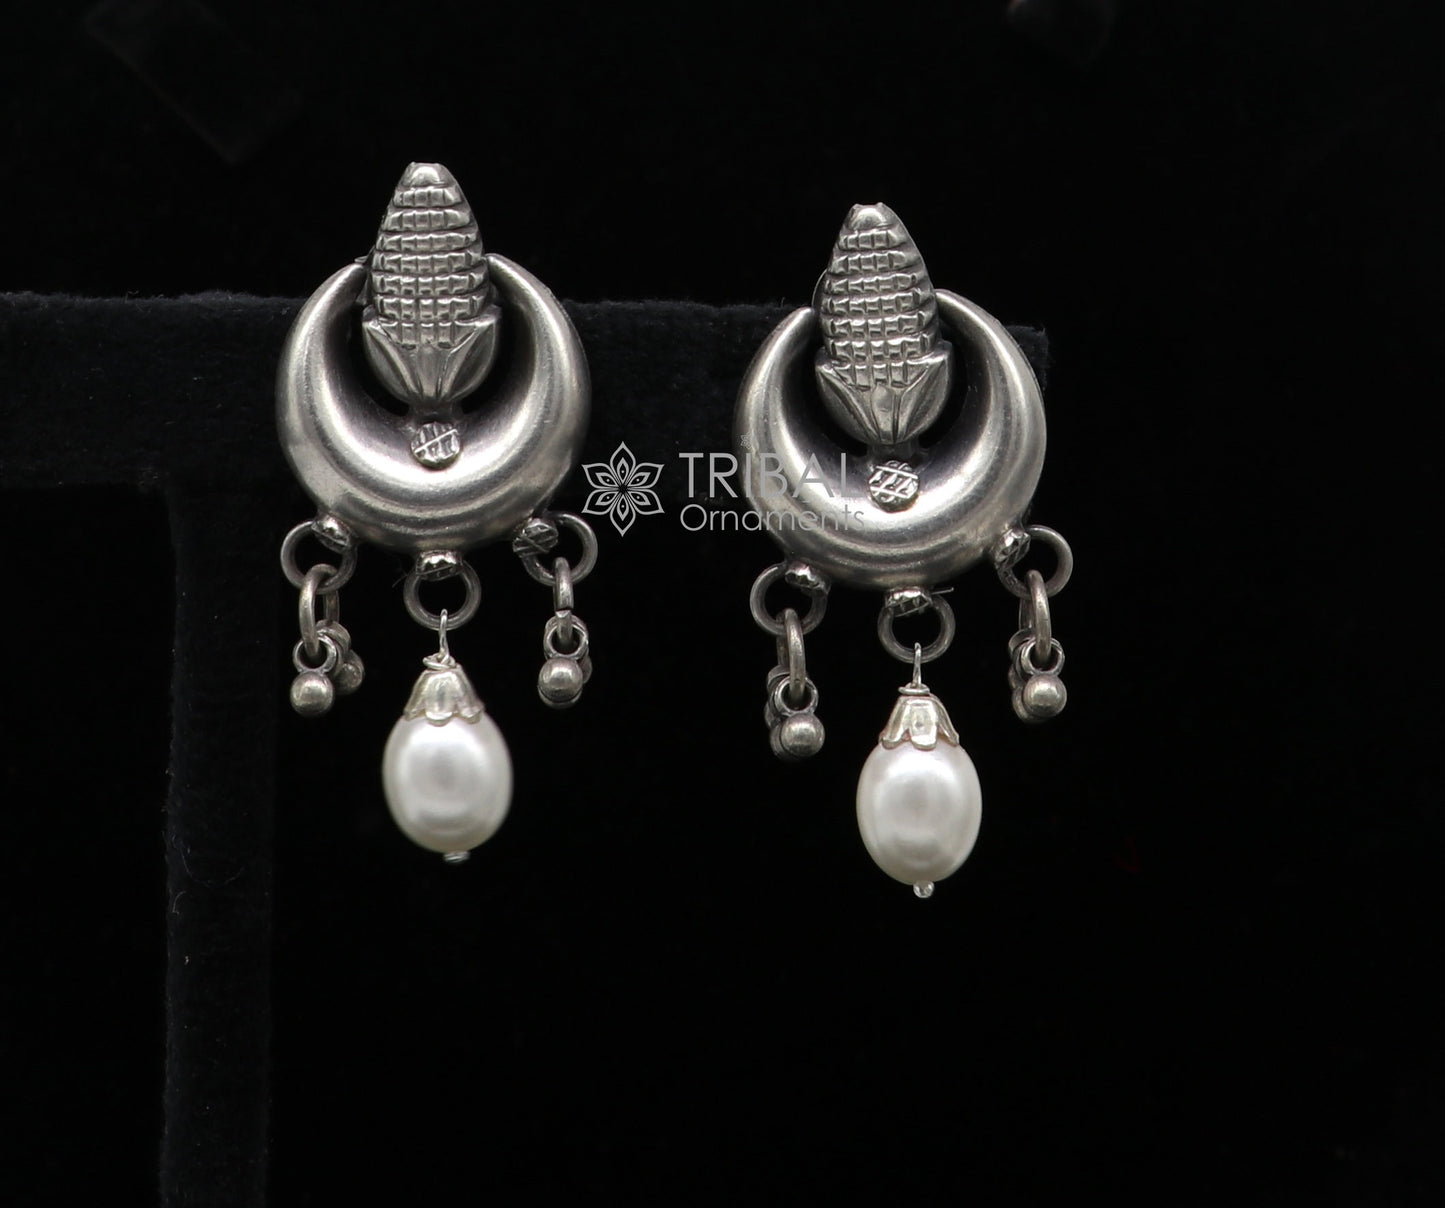 Traditional cultural trendy 925 sterling silver fabulous half moon style stud earrings with hanging pearl stud earring jewelry s1153 - TRIBAL ORNAMENTS